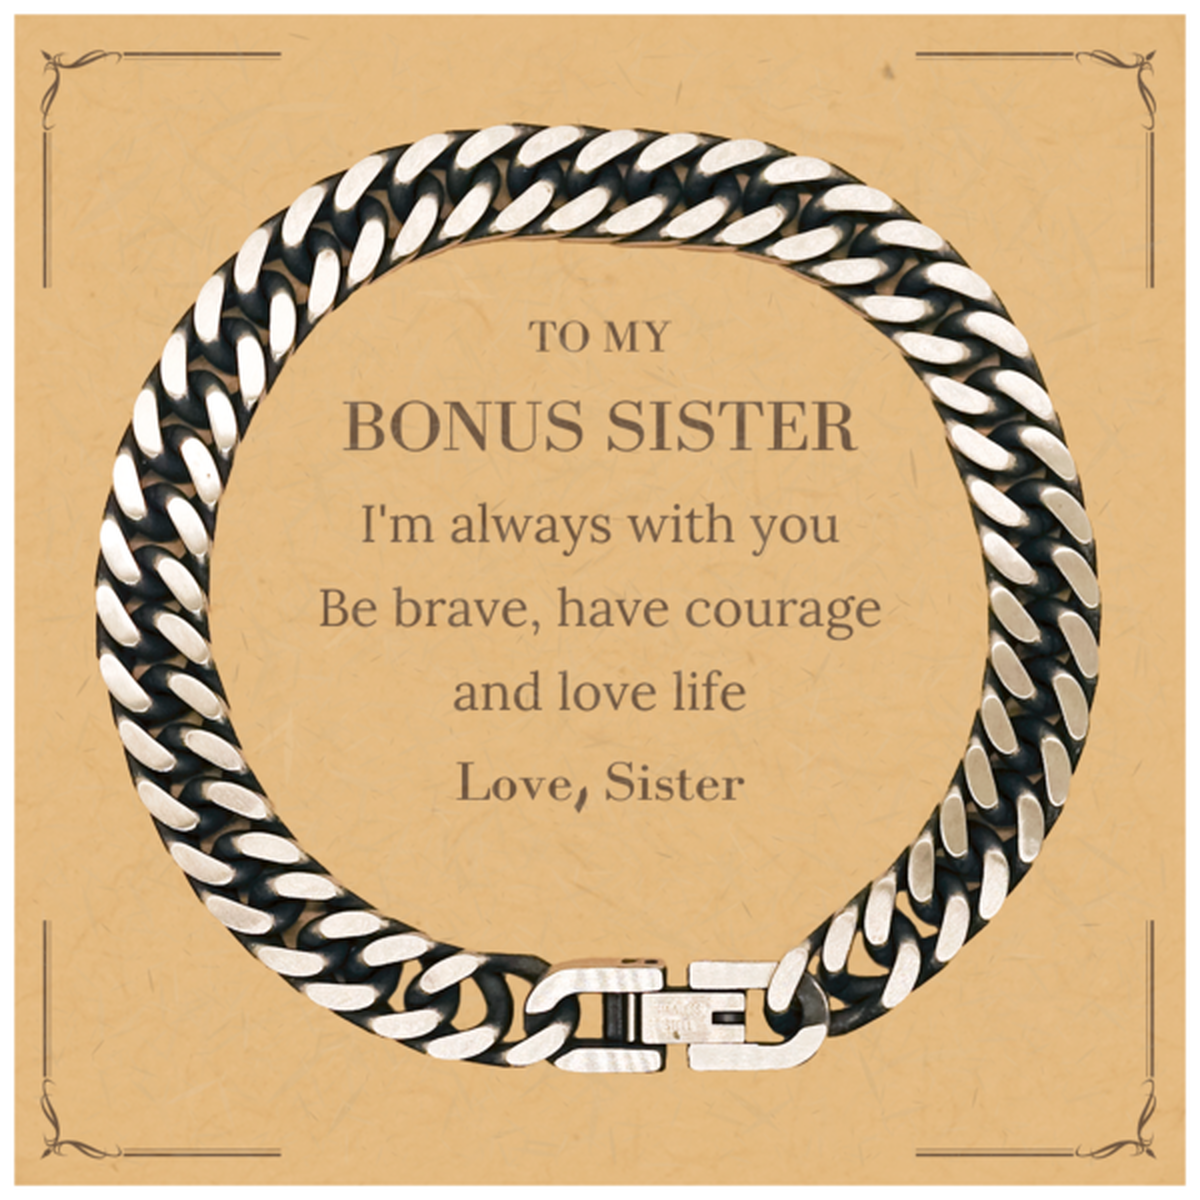 To My Bonus Sister Gifts from Sister, Unique Cuban Link Chain Bracelet Inspirational Christmas Birthday Graduation Gifts for Bonus Sister I'm always with you. Be brave, have courage and love life. Love, Sister